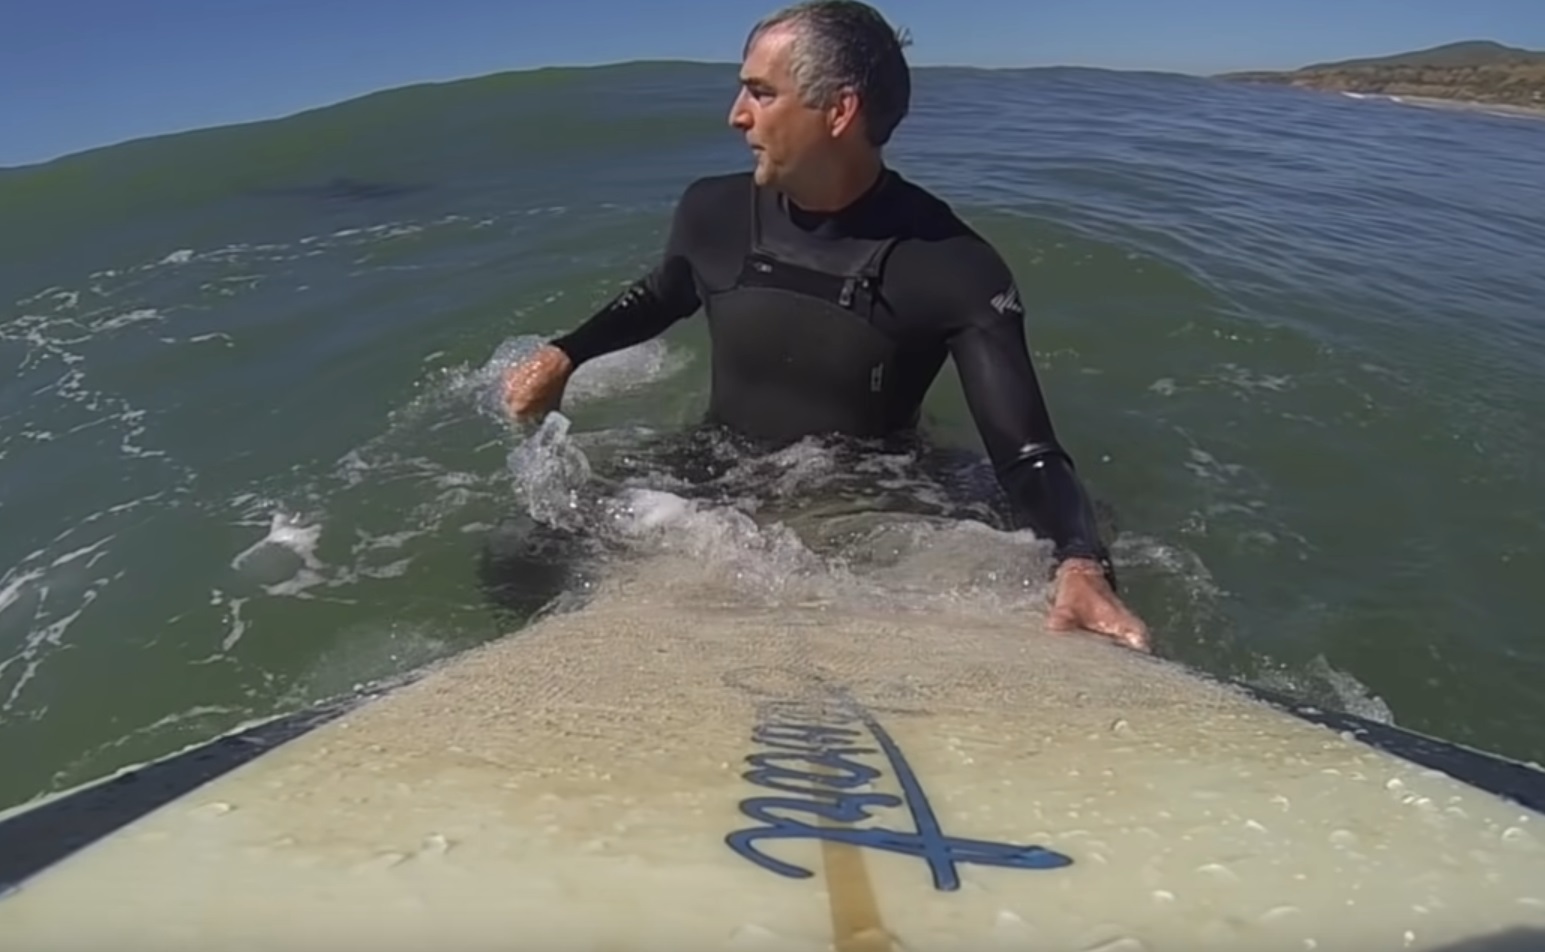 Man Spots Great White Shark While Surfing Alone